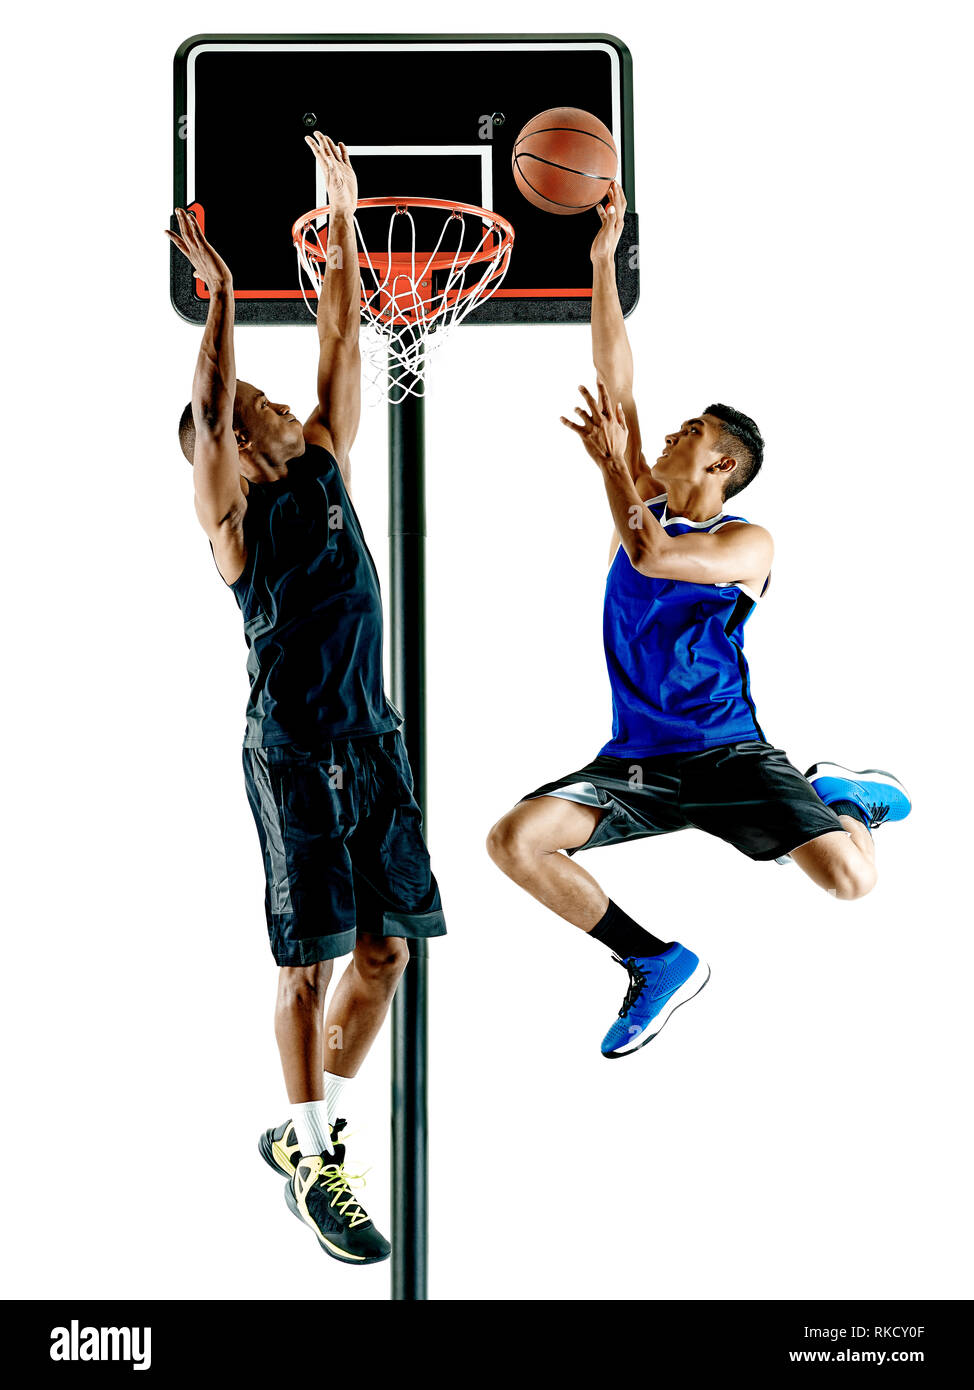 two basketball players men Isolated on white background Stock Photo